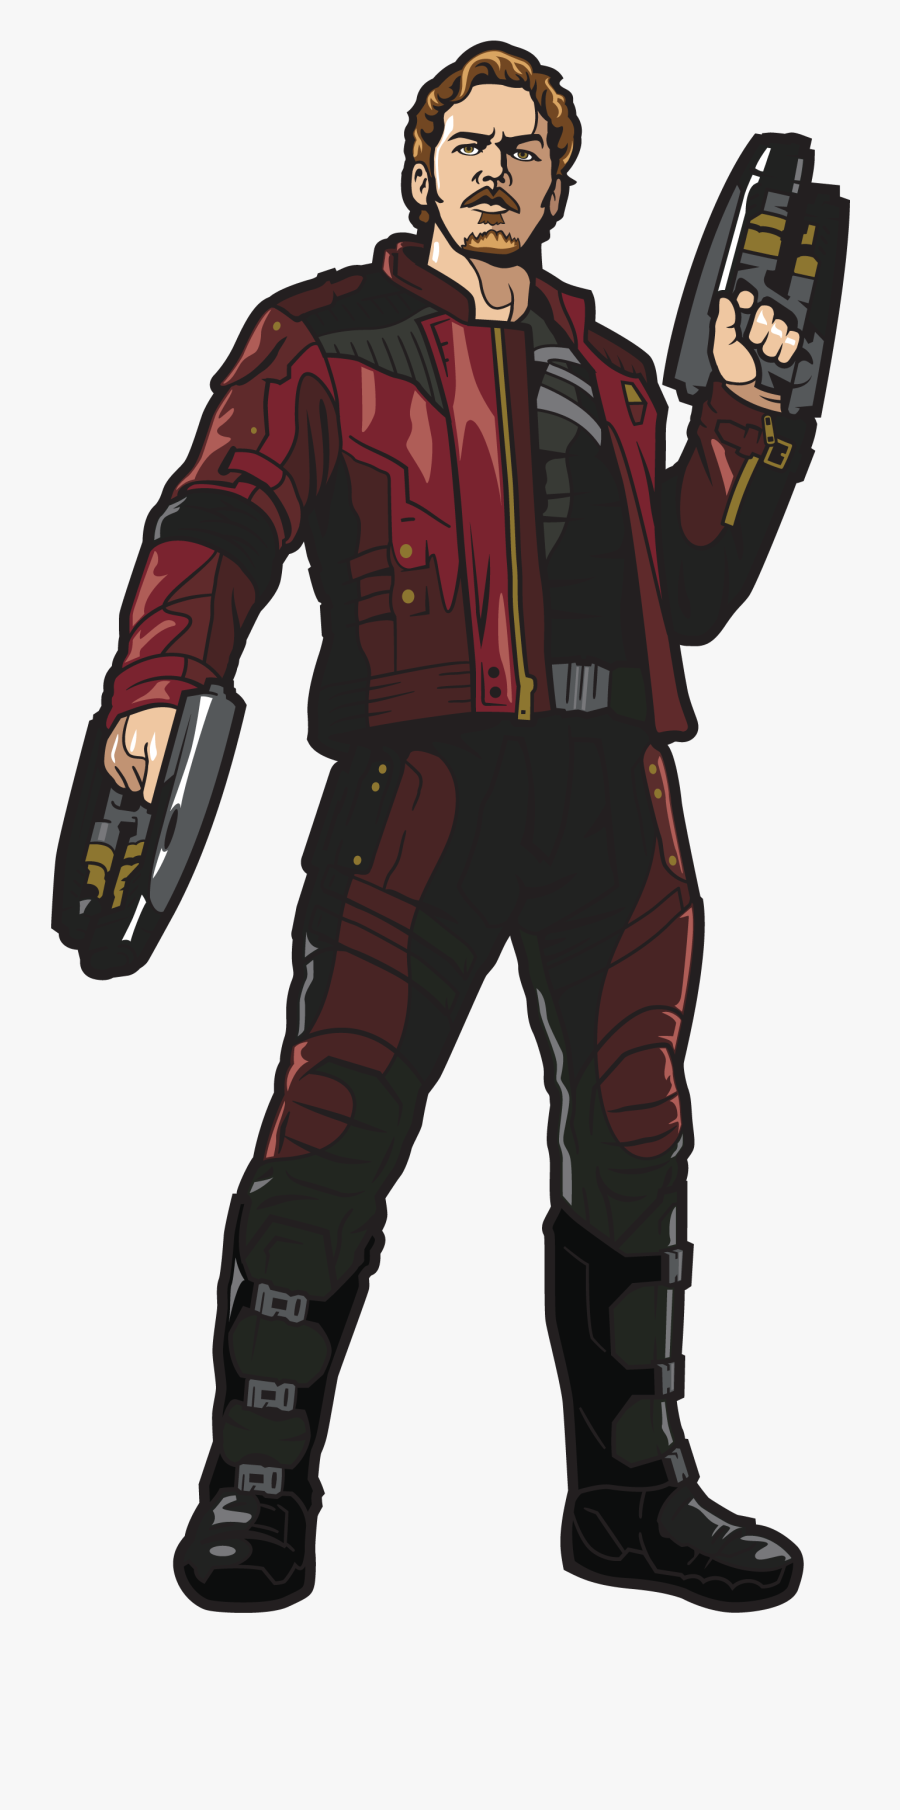 Avengers Infinity War Star Lord Png, Transparent Clipart